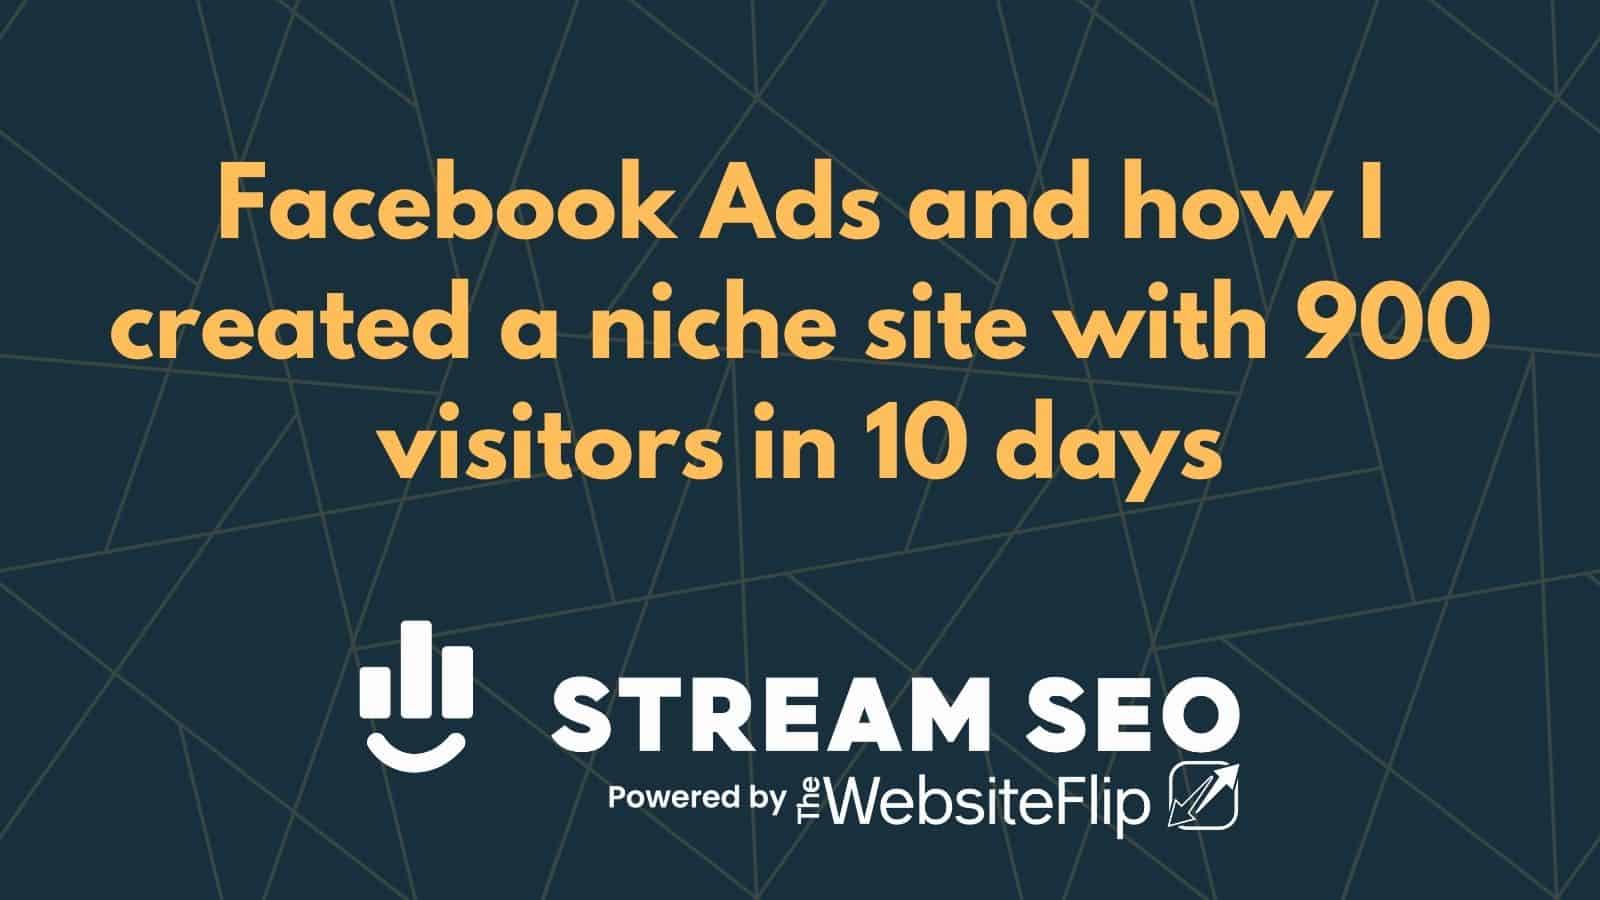 Facebook Ads and how I created a niche site with 900 visitors in 10 days